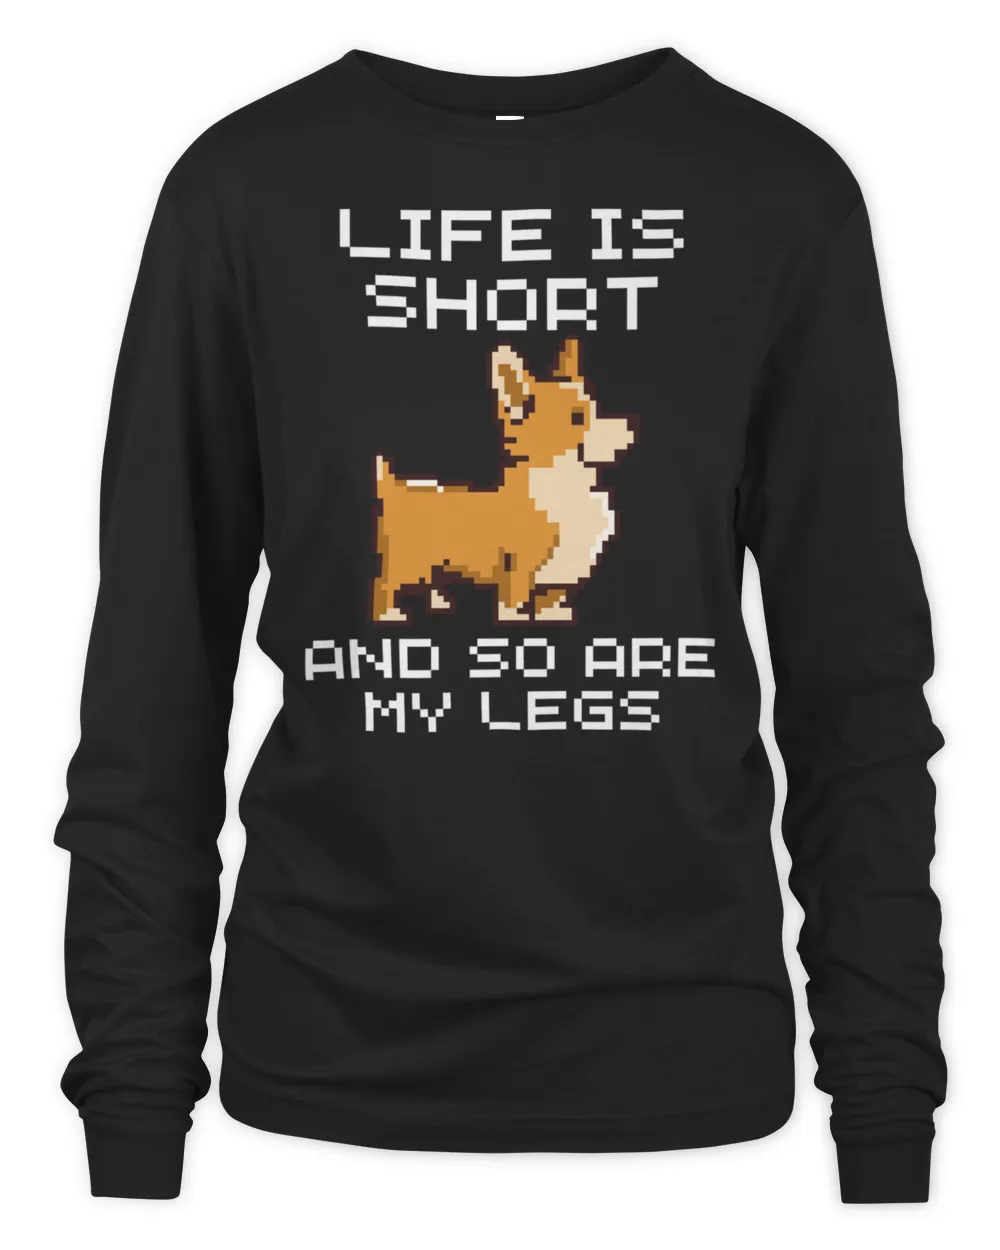 Official Life Is Short So Are My Legs T-Shirt